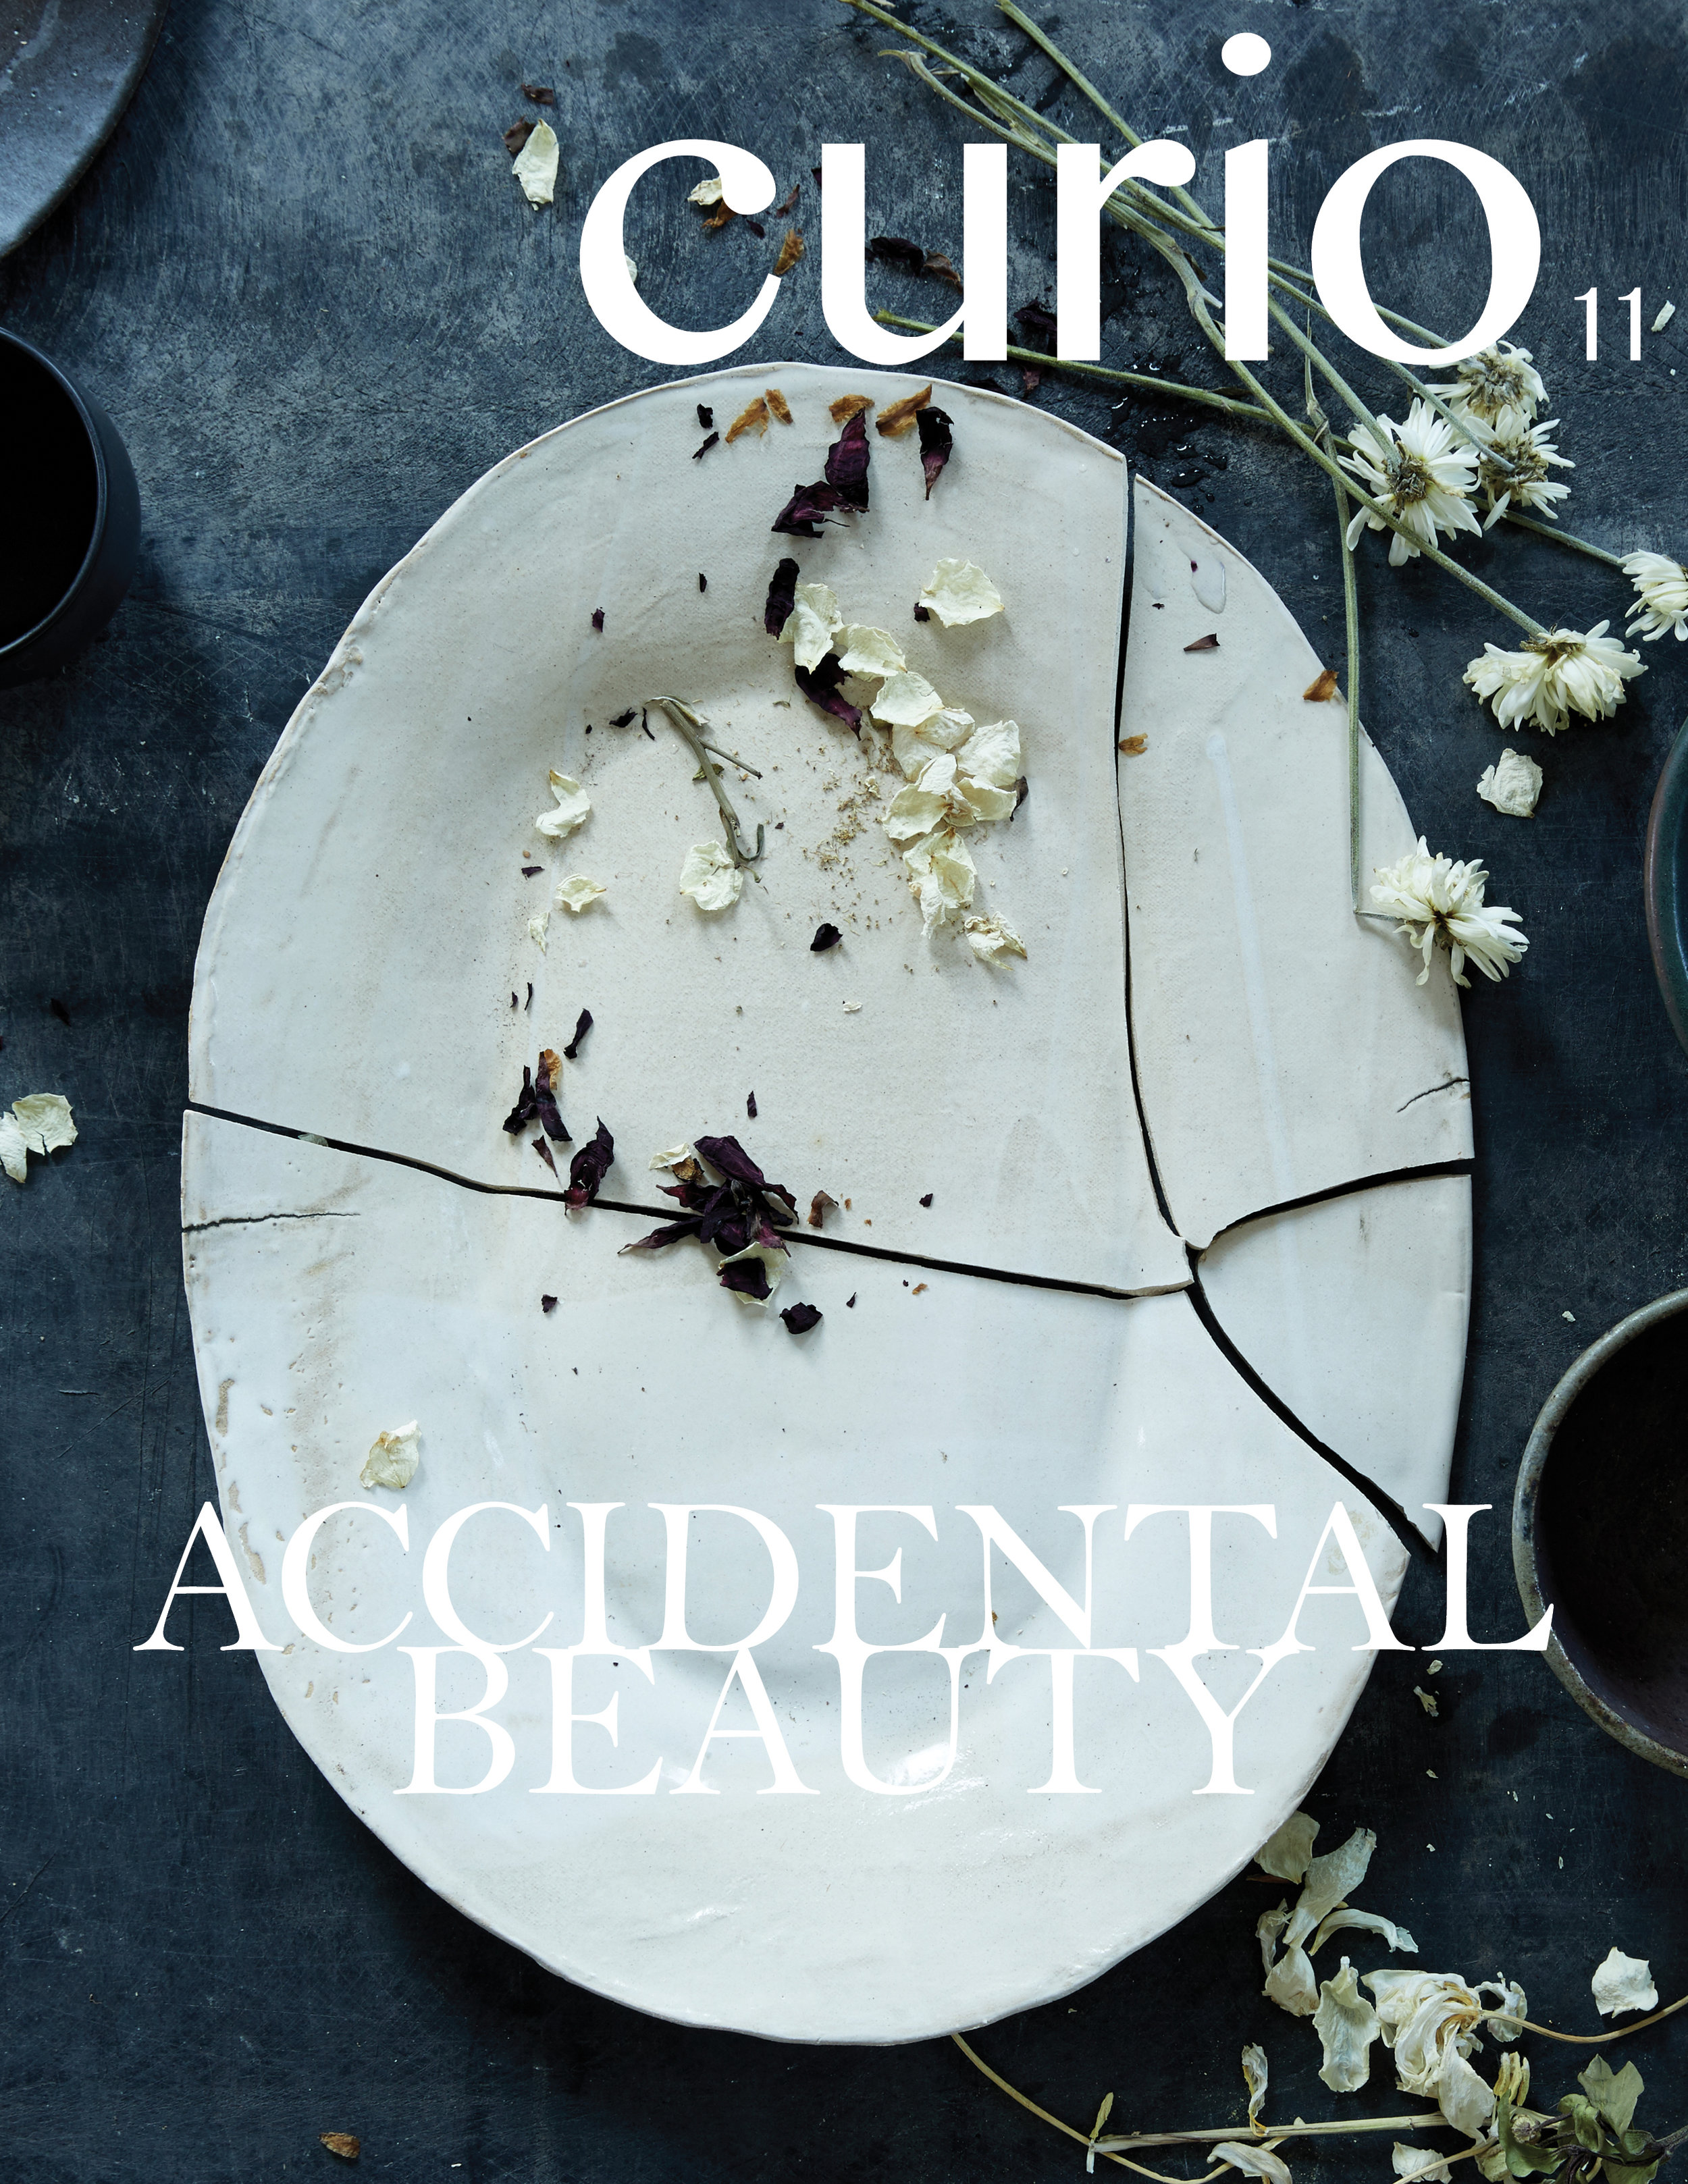 ISSUE 11: ACCIDENTAL BEAUTY